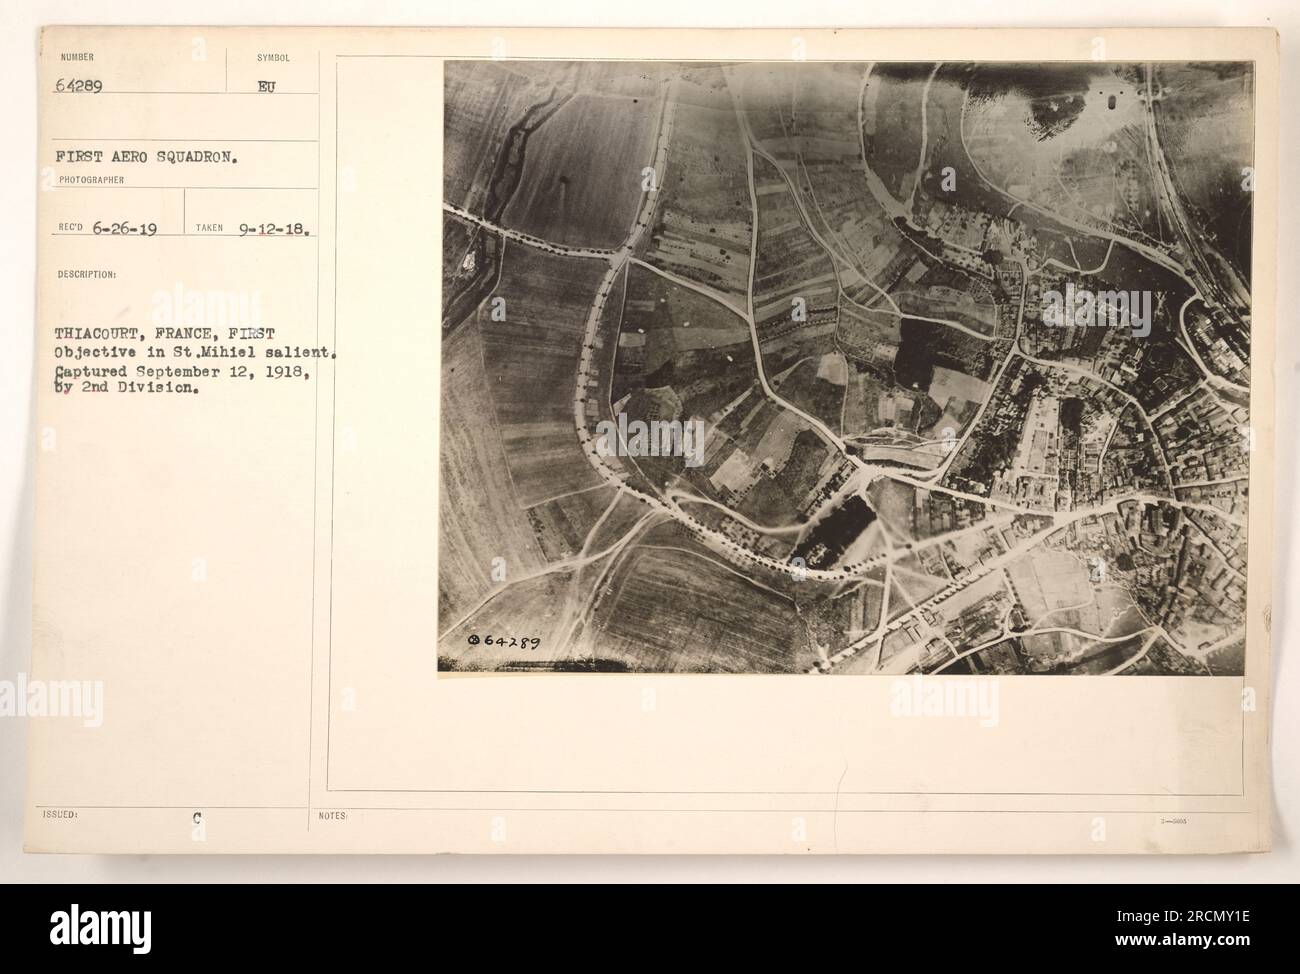 Thiacourt, France, the first objective captured by the 2nd Division on September 12, 1918, in the St. Mihiel salient. This photograph taken by the First Aero Squadron depicts the symbol issued at the location. (Notes: Rec'd 6-26-19, Taken 9-12-18. C Notes 064289 4404) Stock Photo